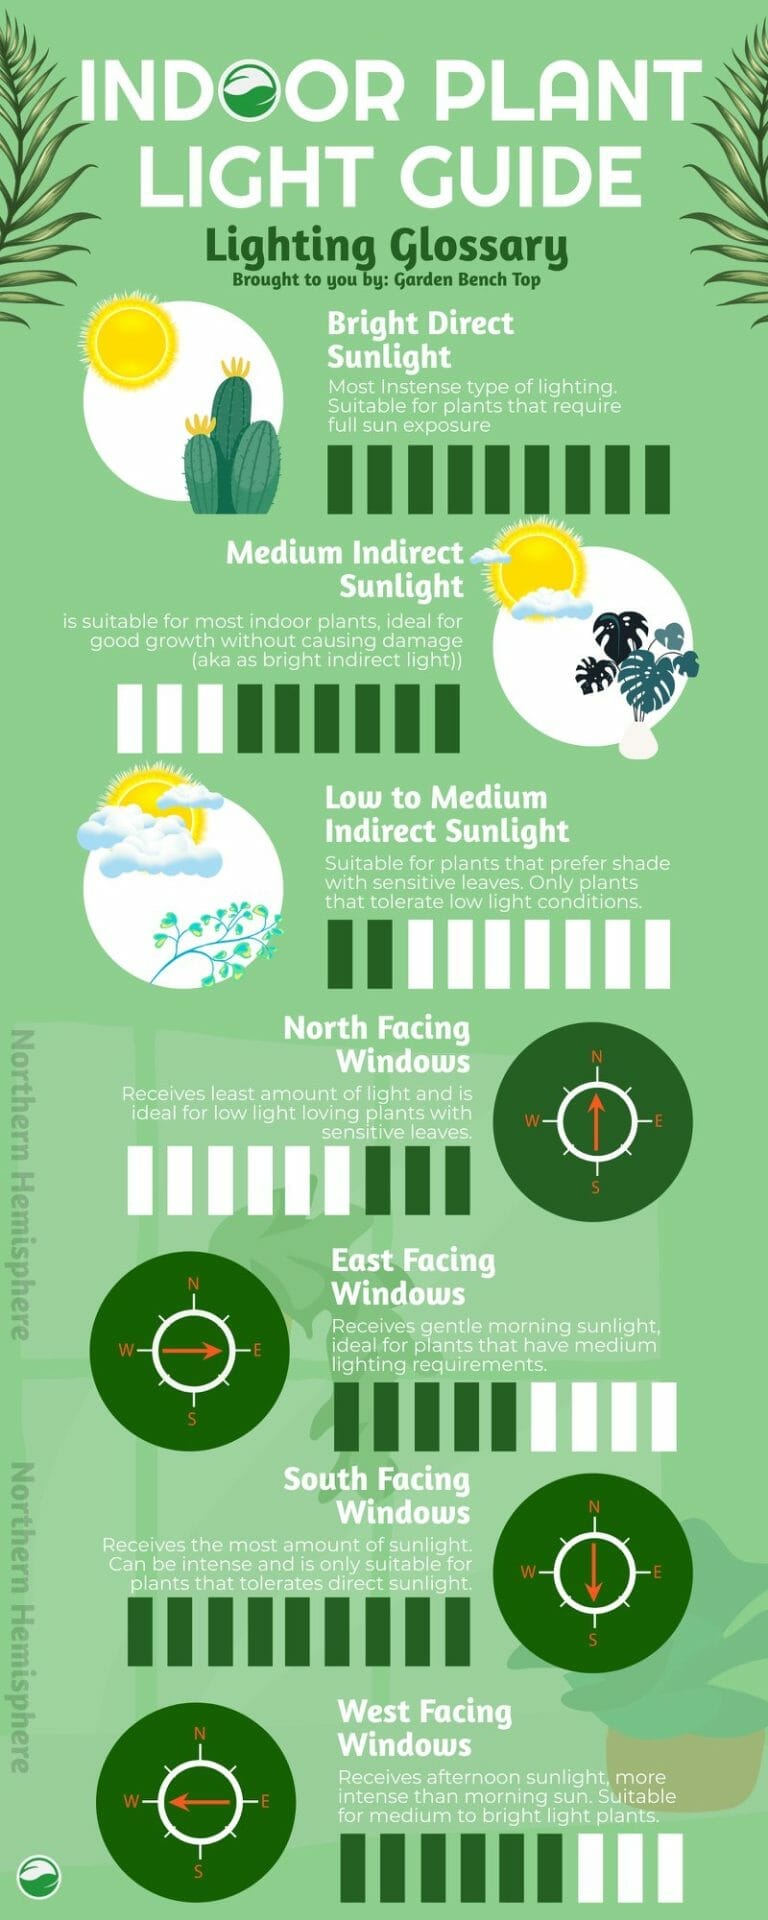 Indoor Plant Light Guide Infographic